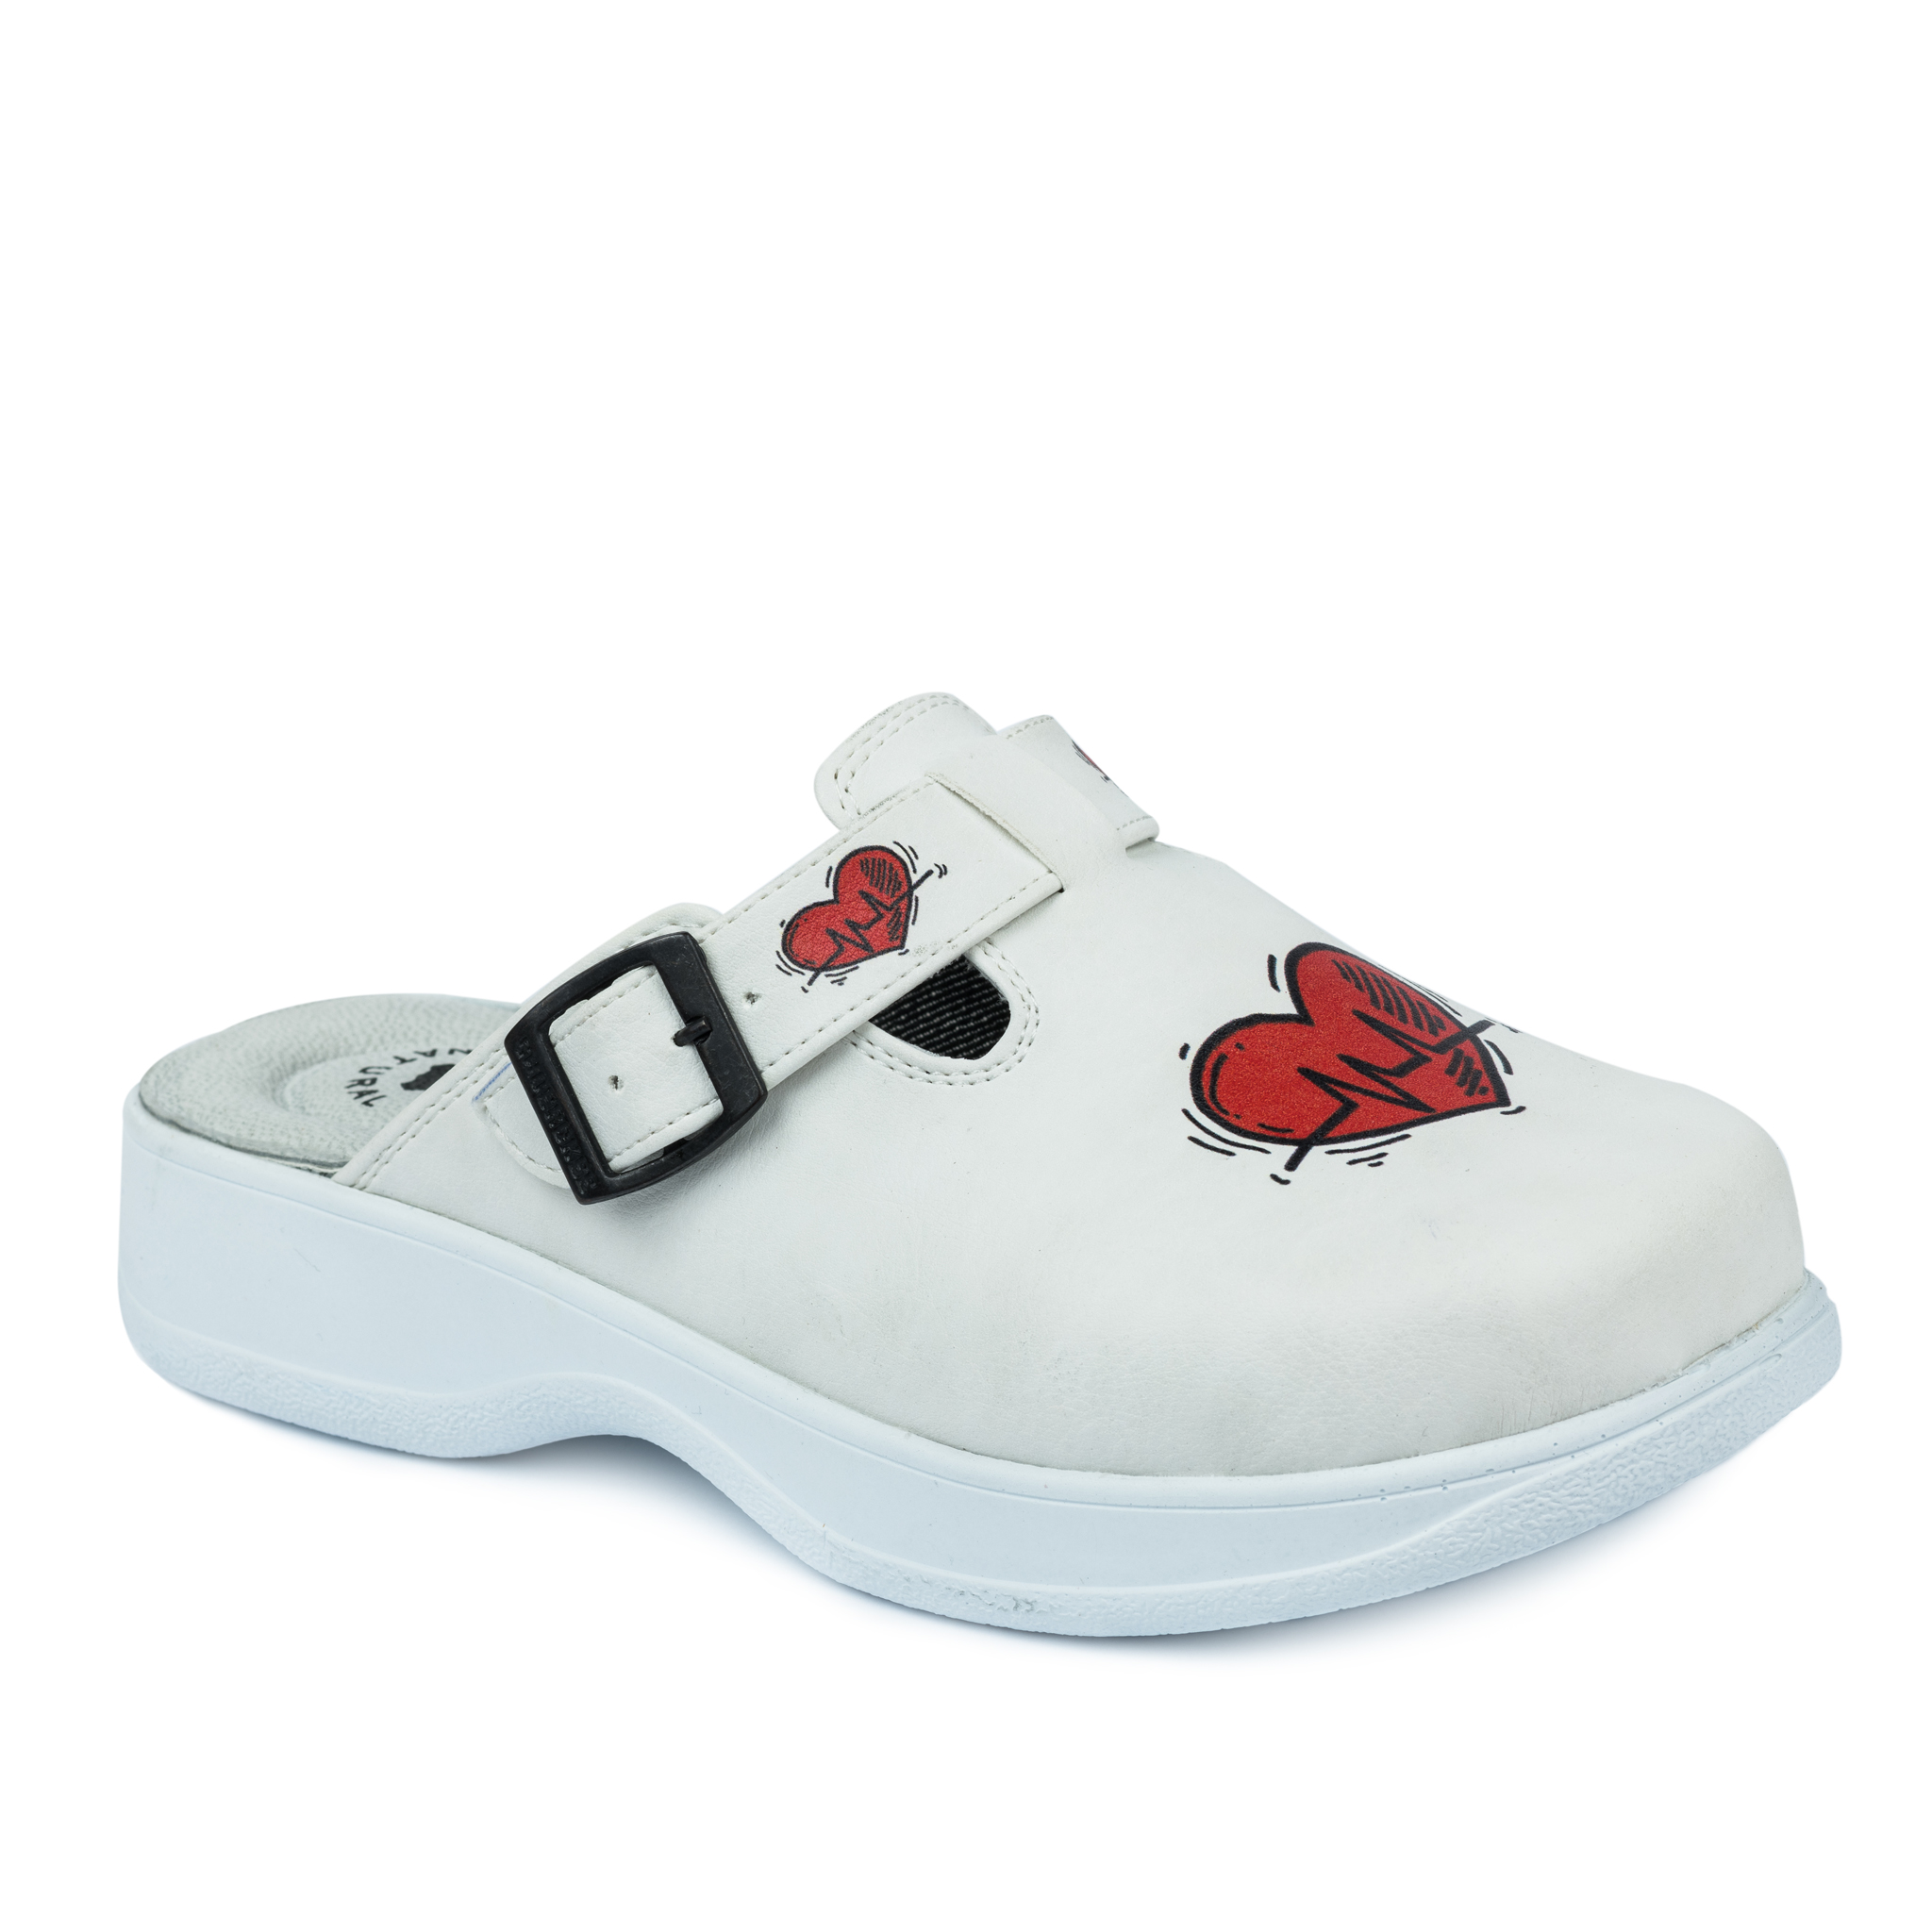 Patterned women clogs A066 - MEDICAL - WHITE